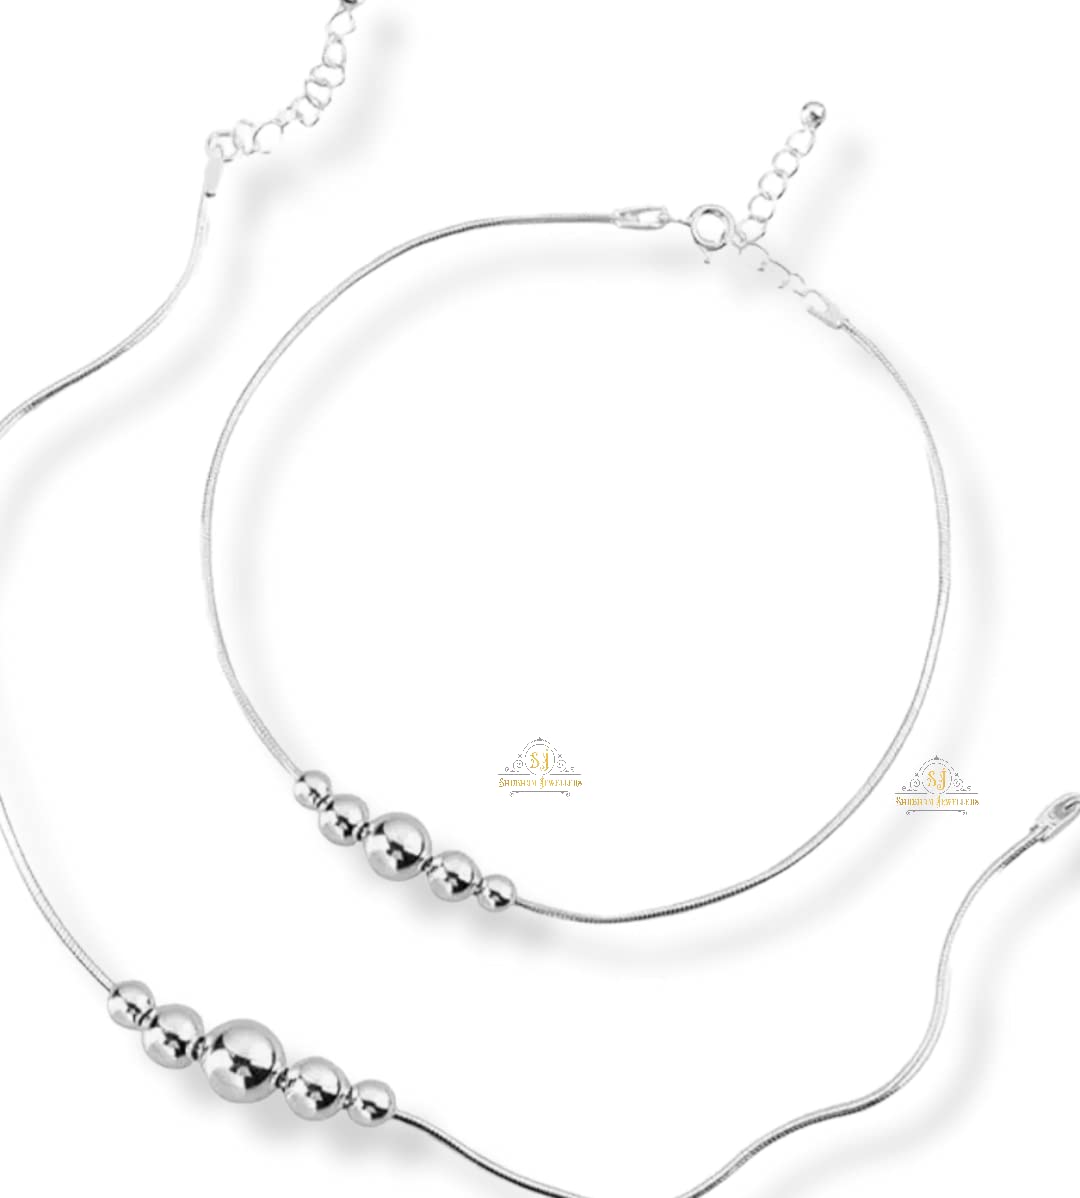 SJ SHUBHAM JEWELLERS™ Pure Silver 5 Moving Ball Threaded Snake Pattern Anklet (Payal) in Pure 92.5 Pure Sterling Silver for Girls & Women (Silver) - JewelYaari By Shubham Jewellers